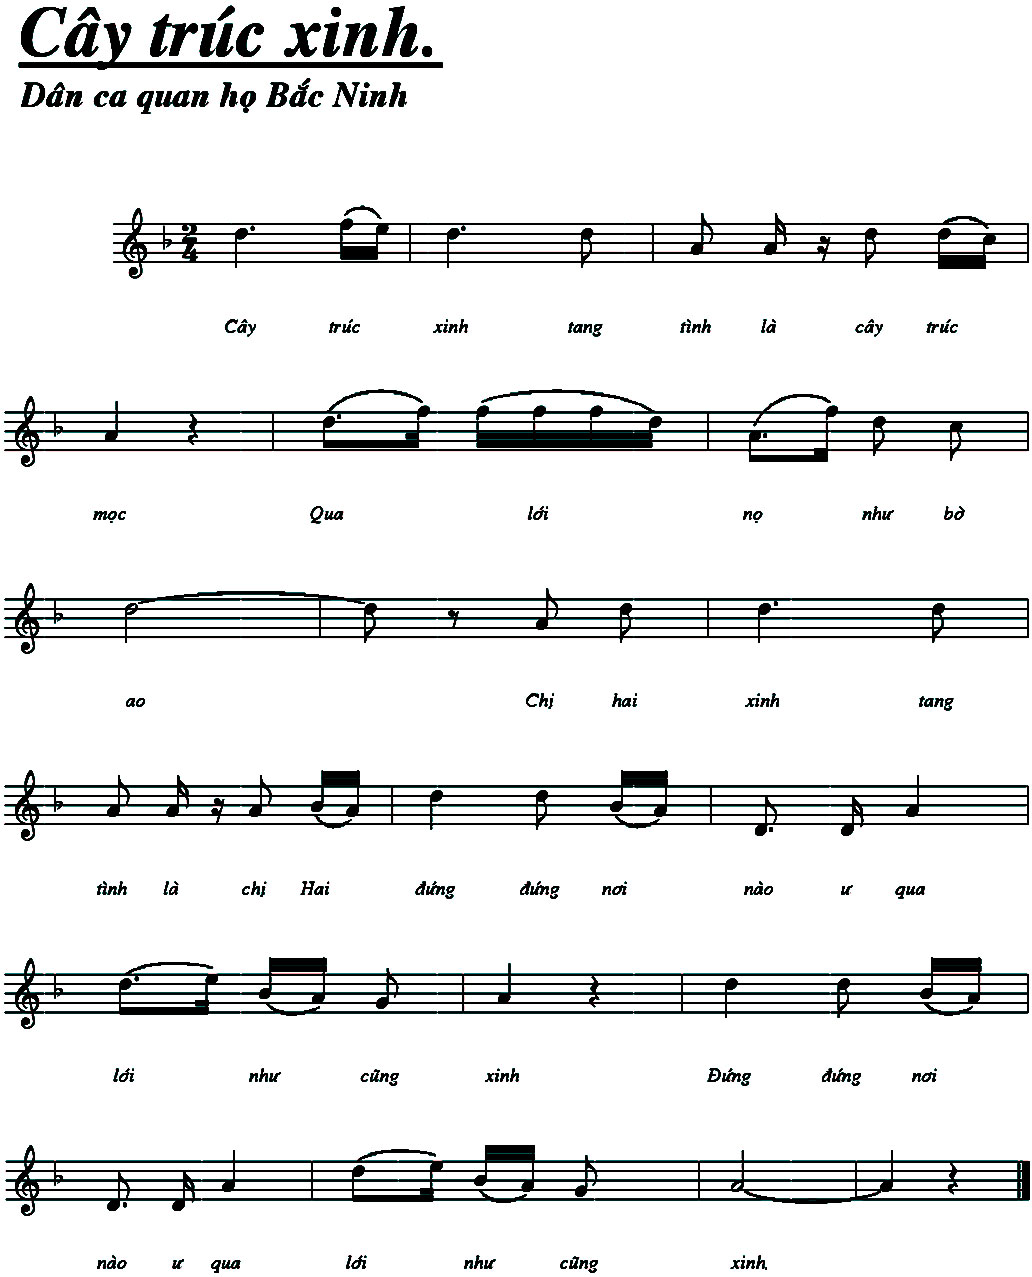 What are the sheet music and musical notes for the song Cây Trúc Xinh?